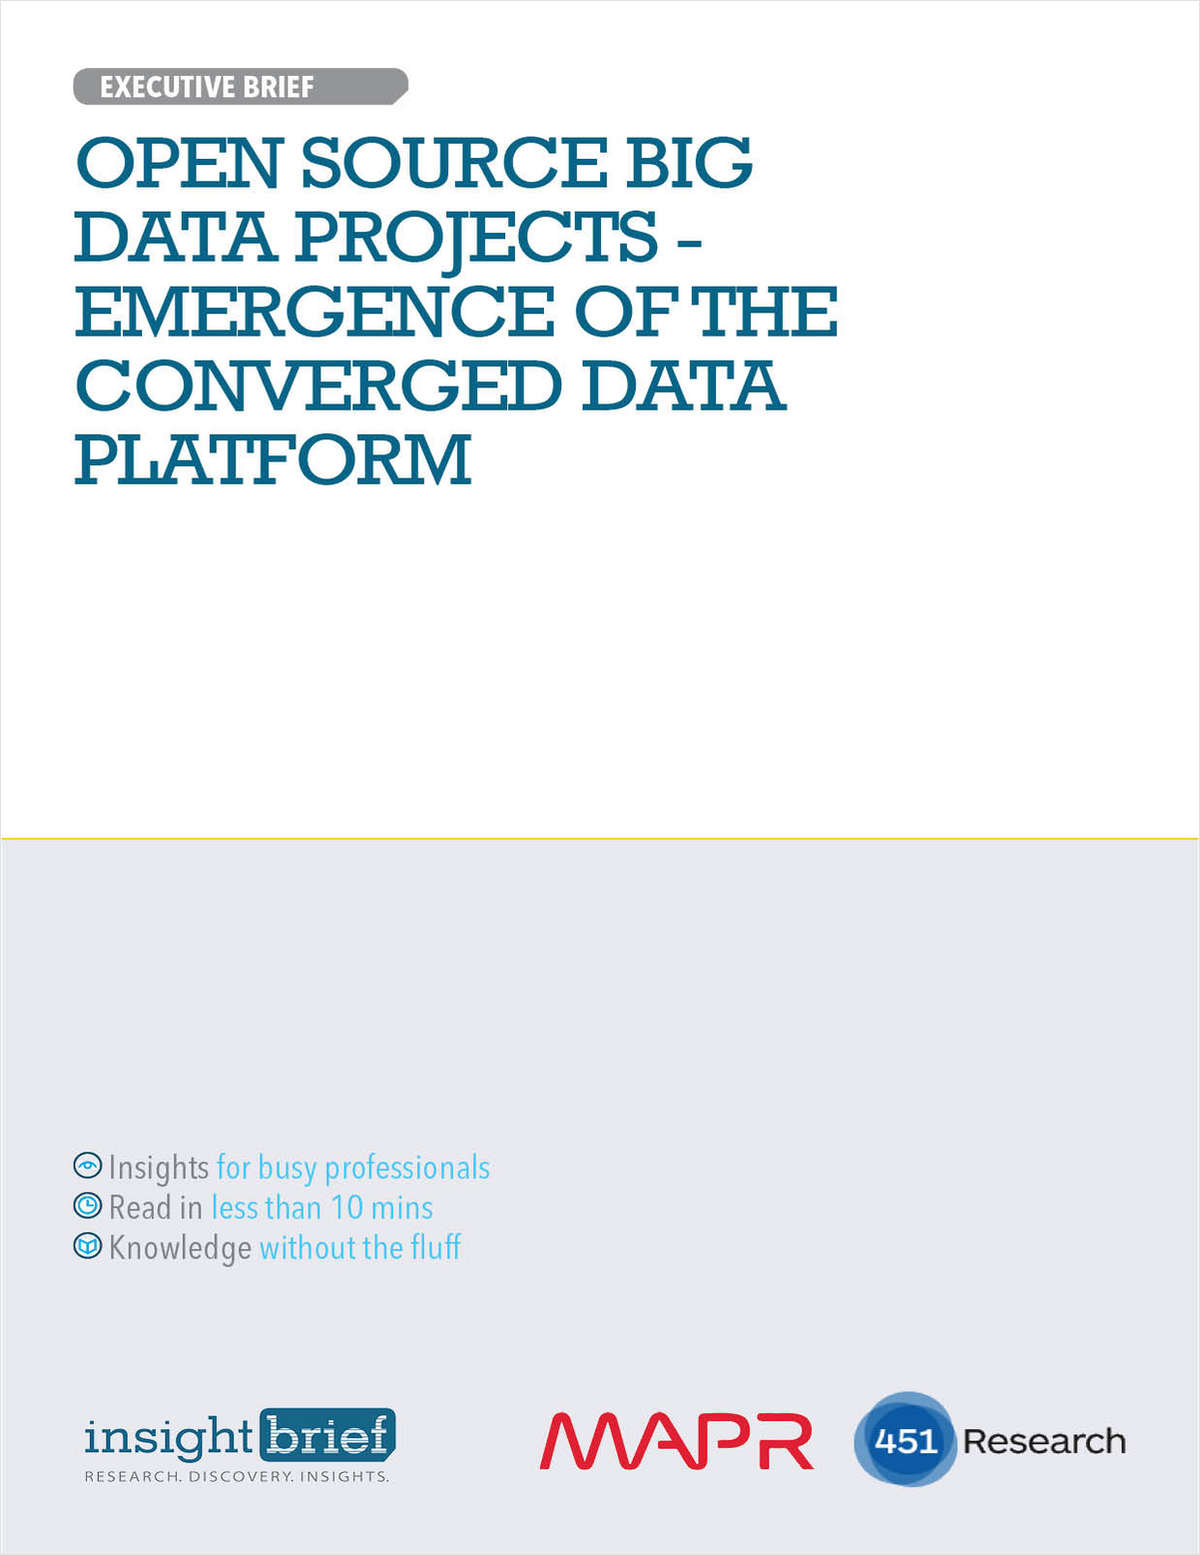 Open Source Big Data Projects - Emergence of the Converged Data Platform